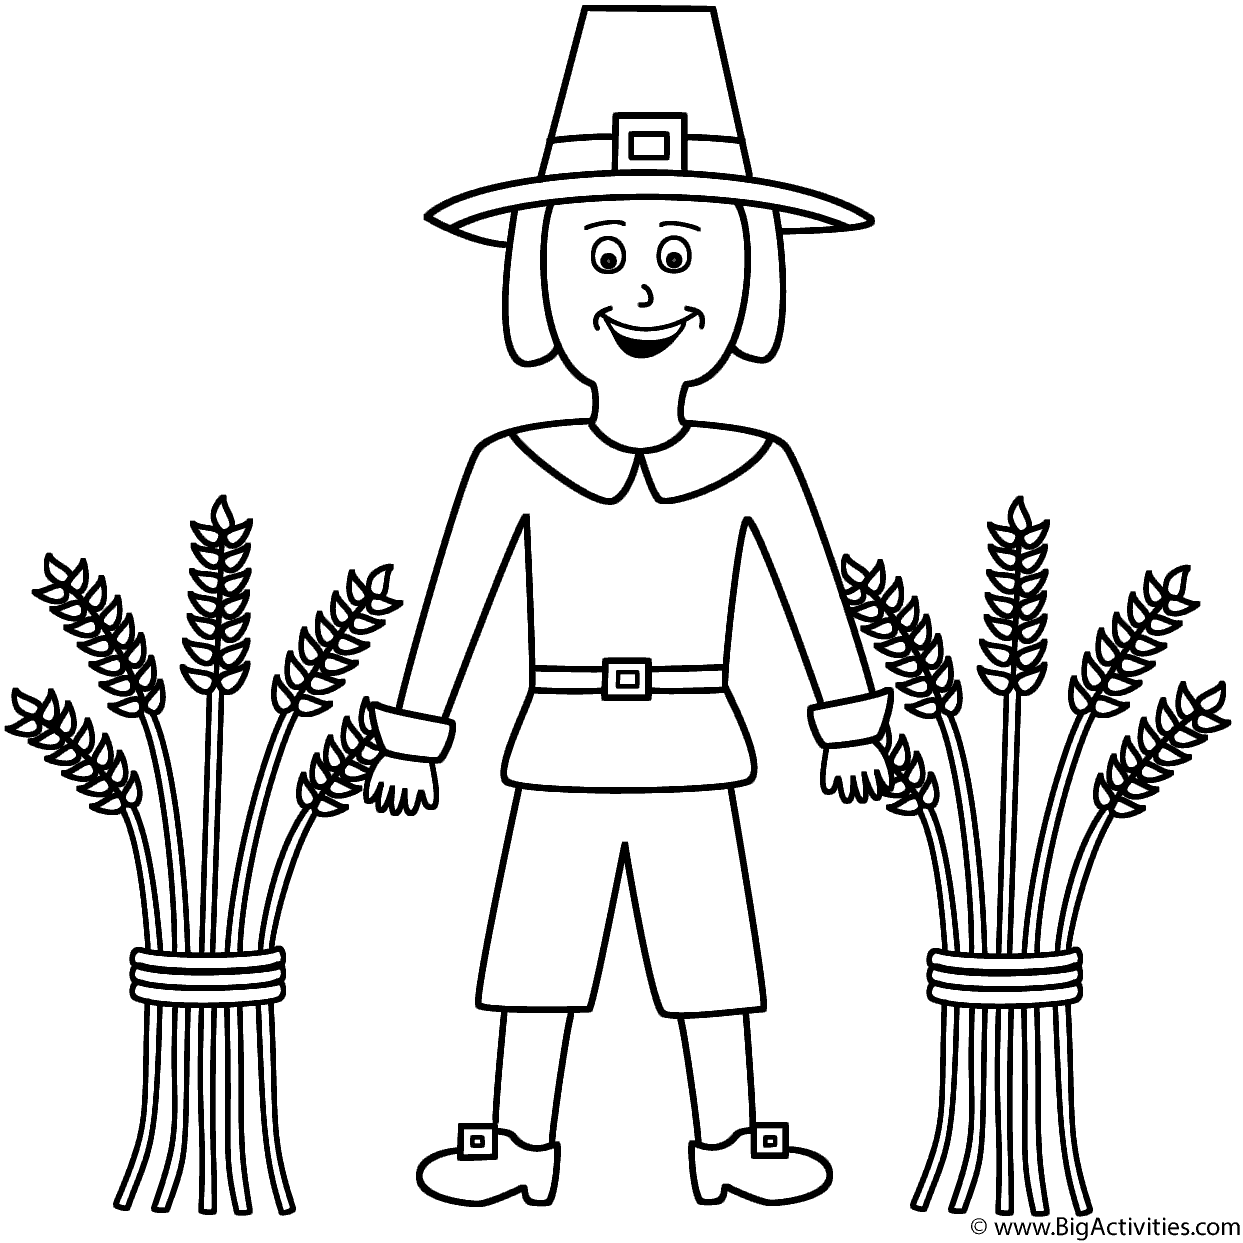 Pilgrim with wheat sheaves - Coloring Page (Thanksgiving)